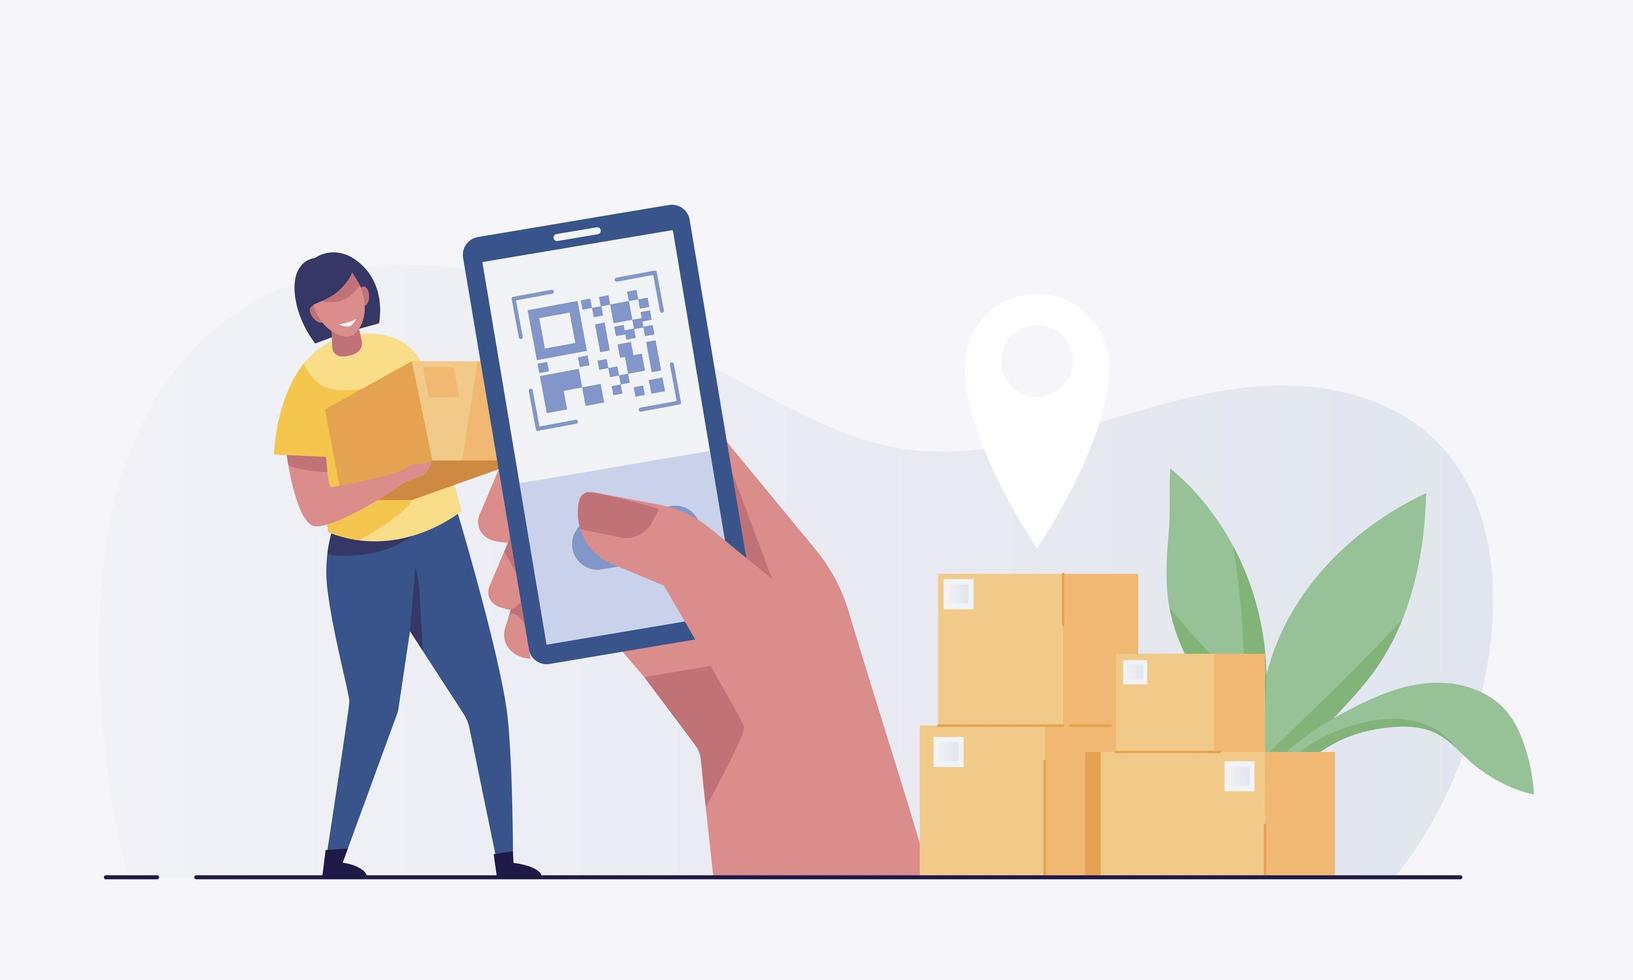 Qr code with hand holding phone with boxes. People holding phone with QR sign. vector